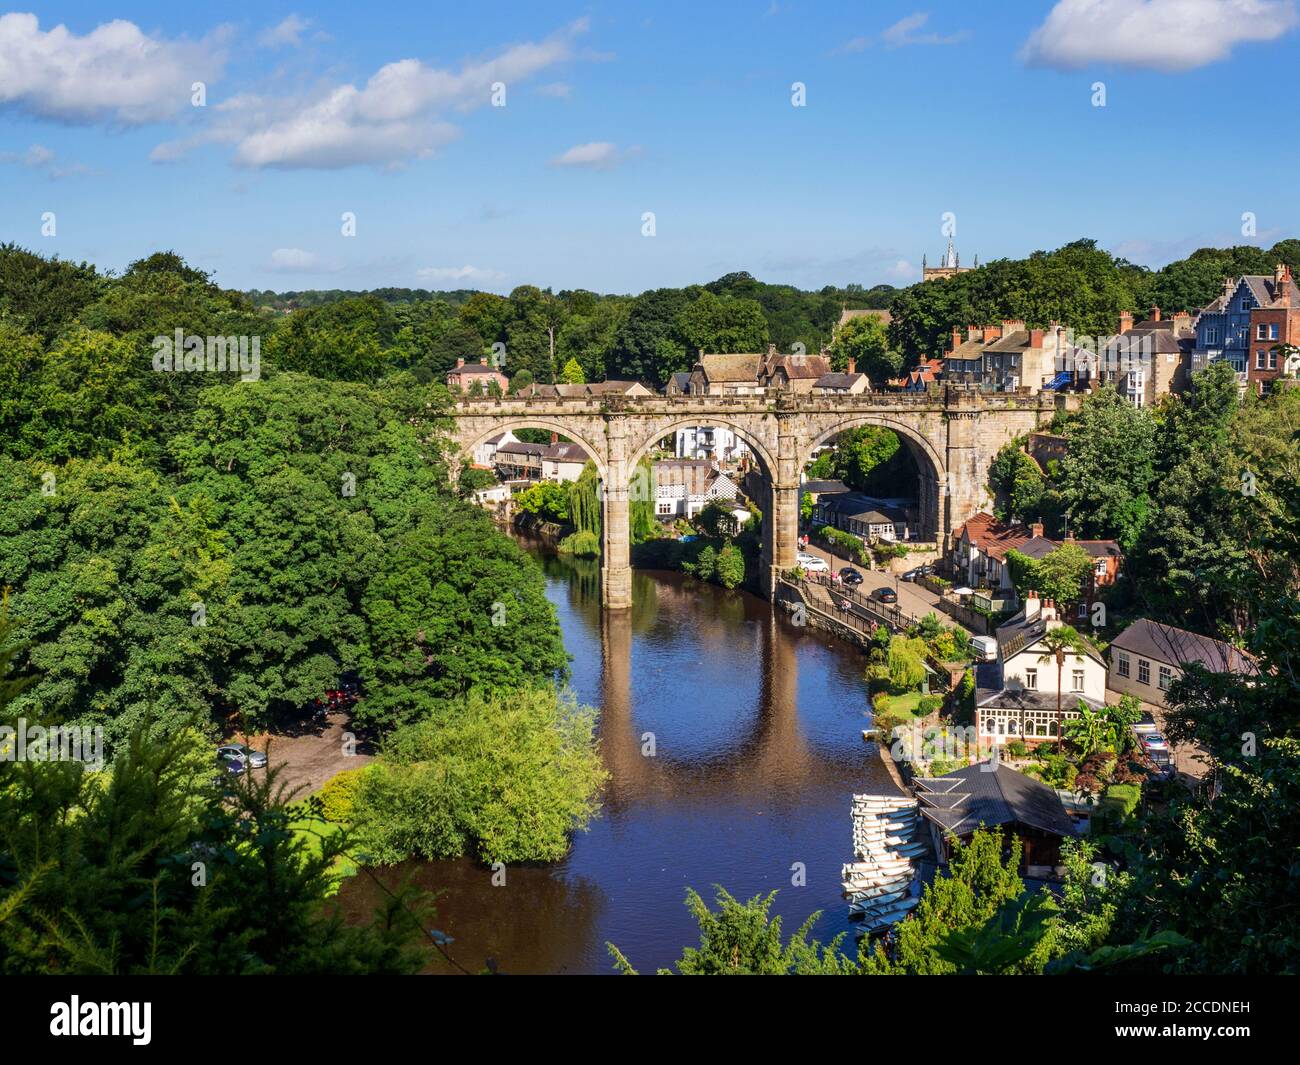 Railway viaduct over the River Nidd in summer Knaresborough North Yorkshire England Stock Photo